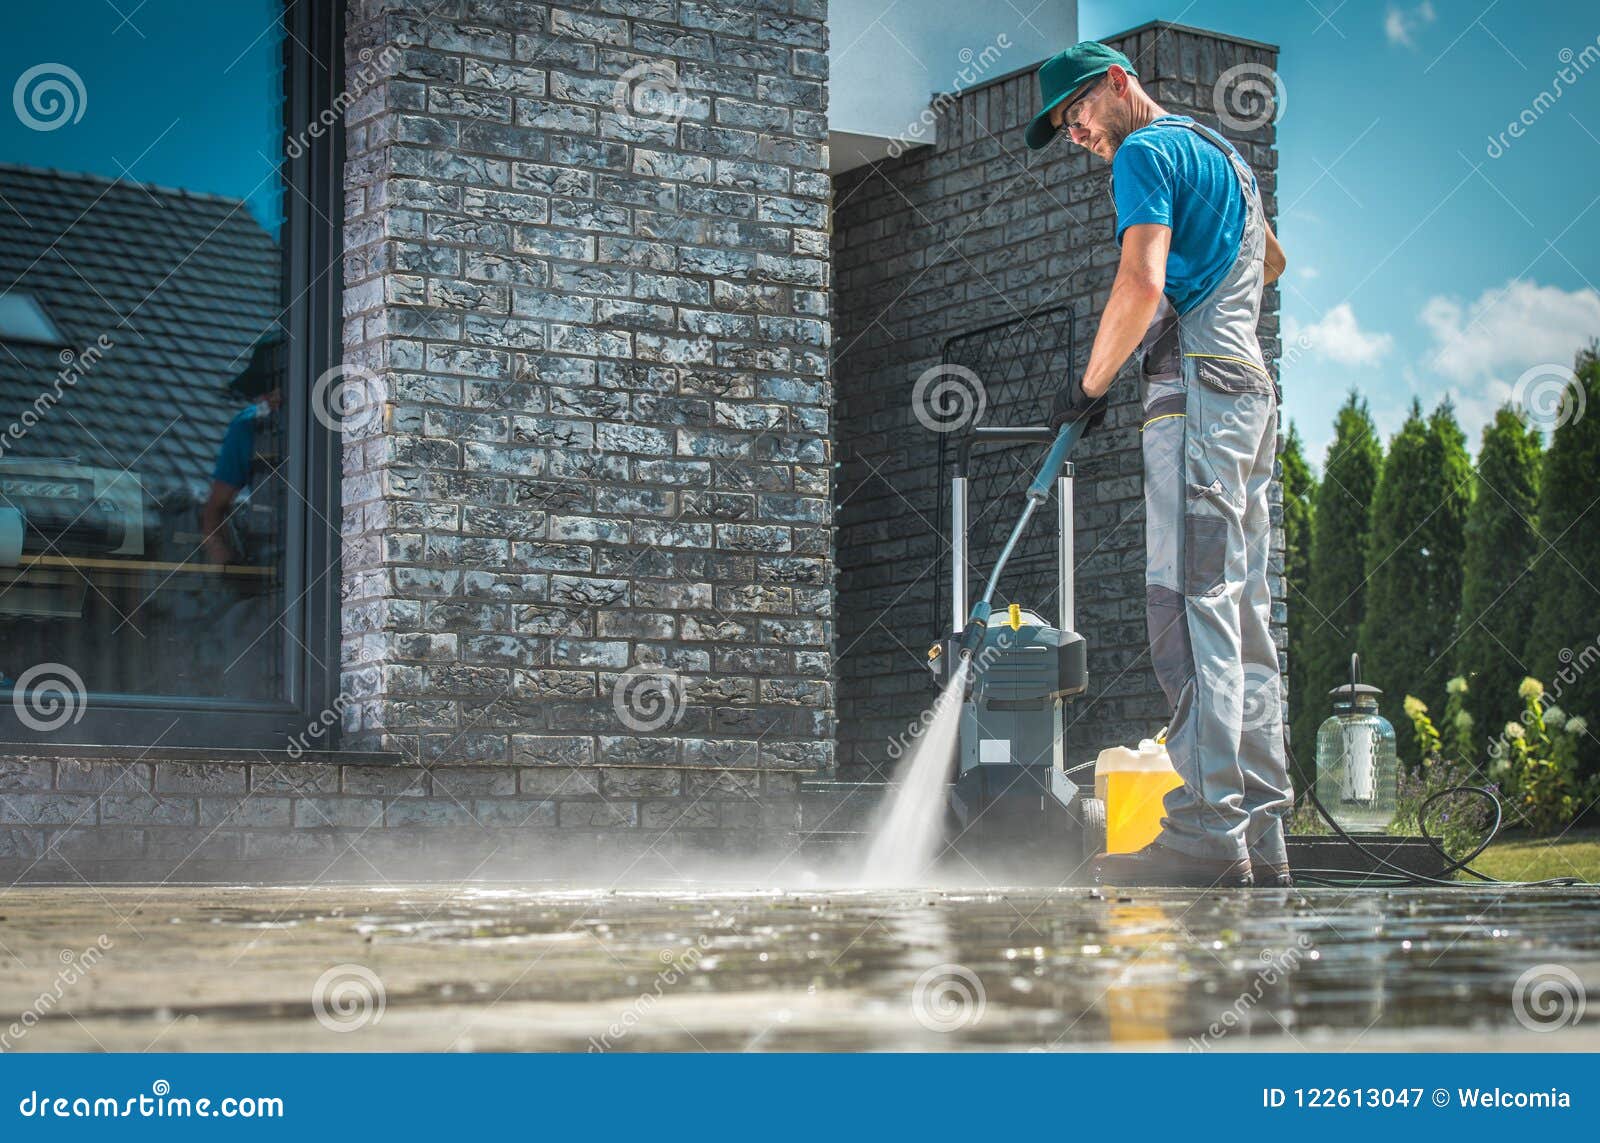 pressure washer cleaning